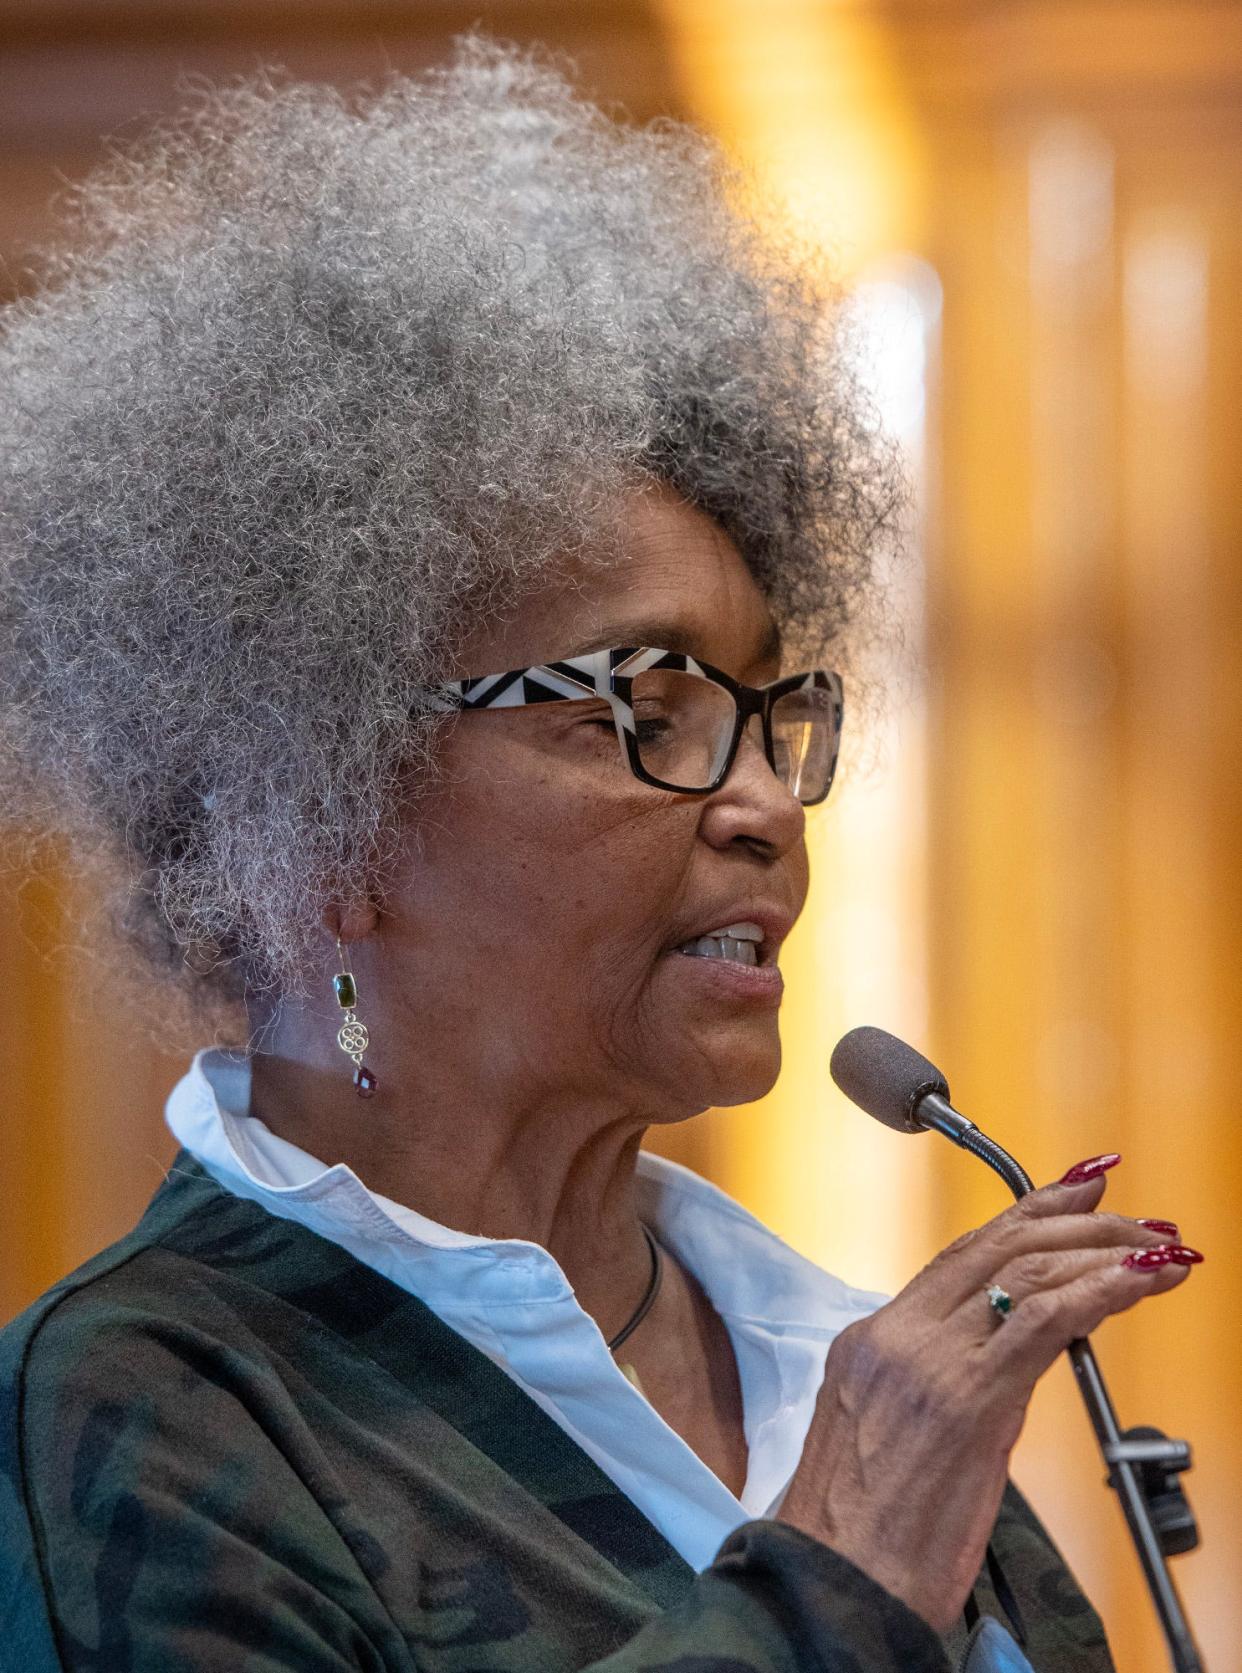 Sharon Henderson of Westborough reads a section of the Frederick Douglass speech, "What to the slave is the Fourth of July?" The speech was read in sections at City Hall Tuesday.